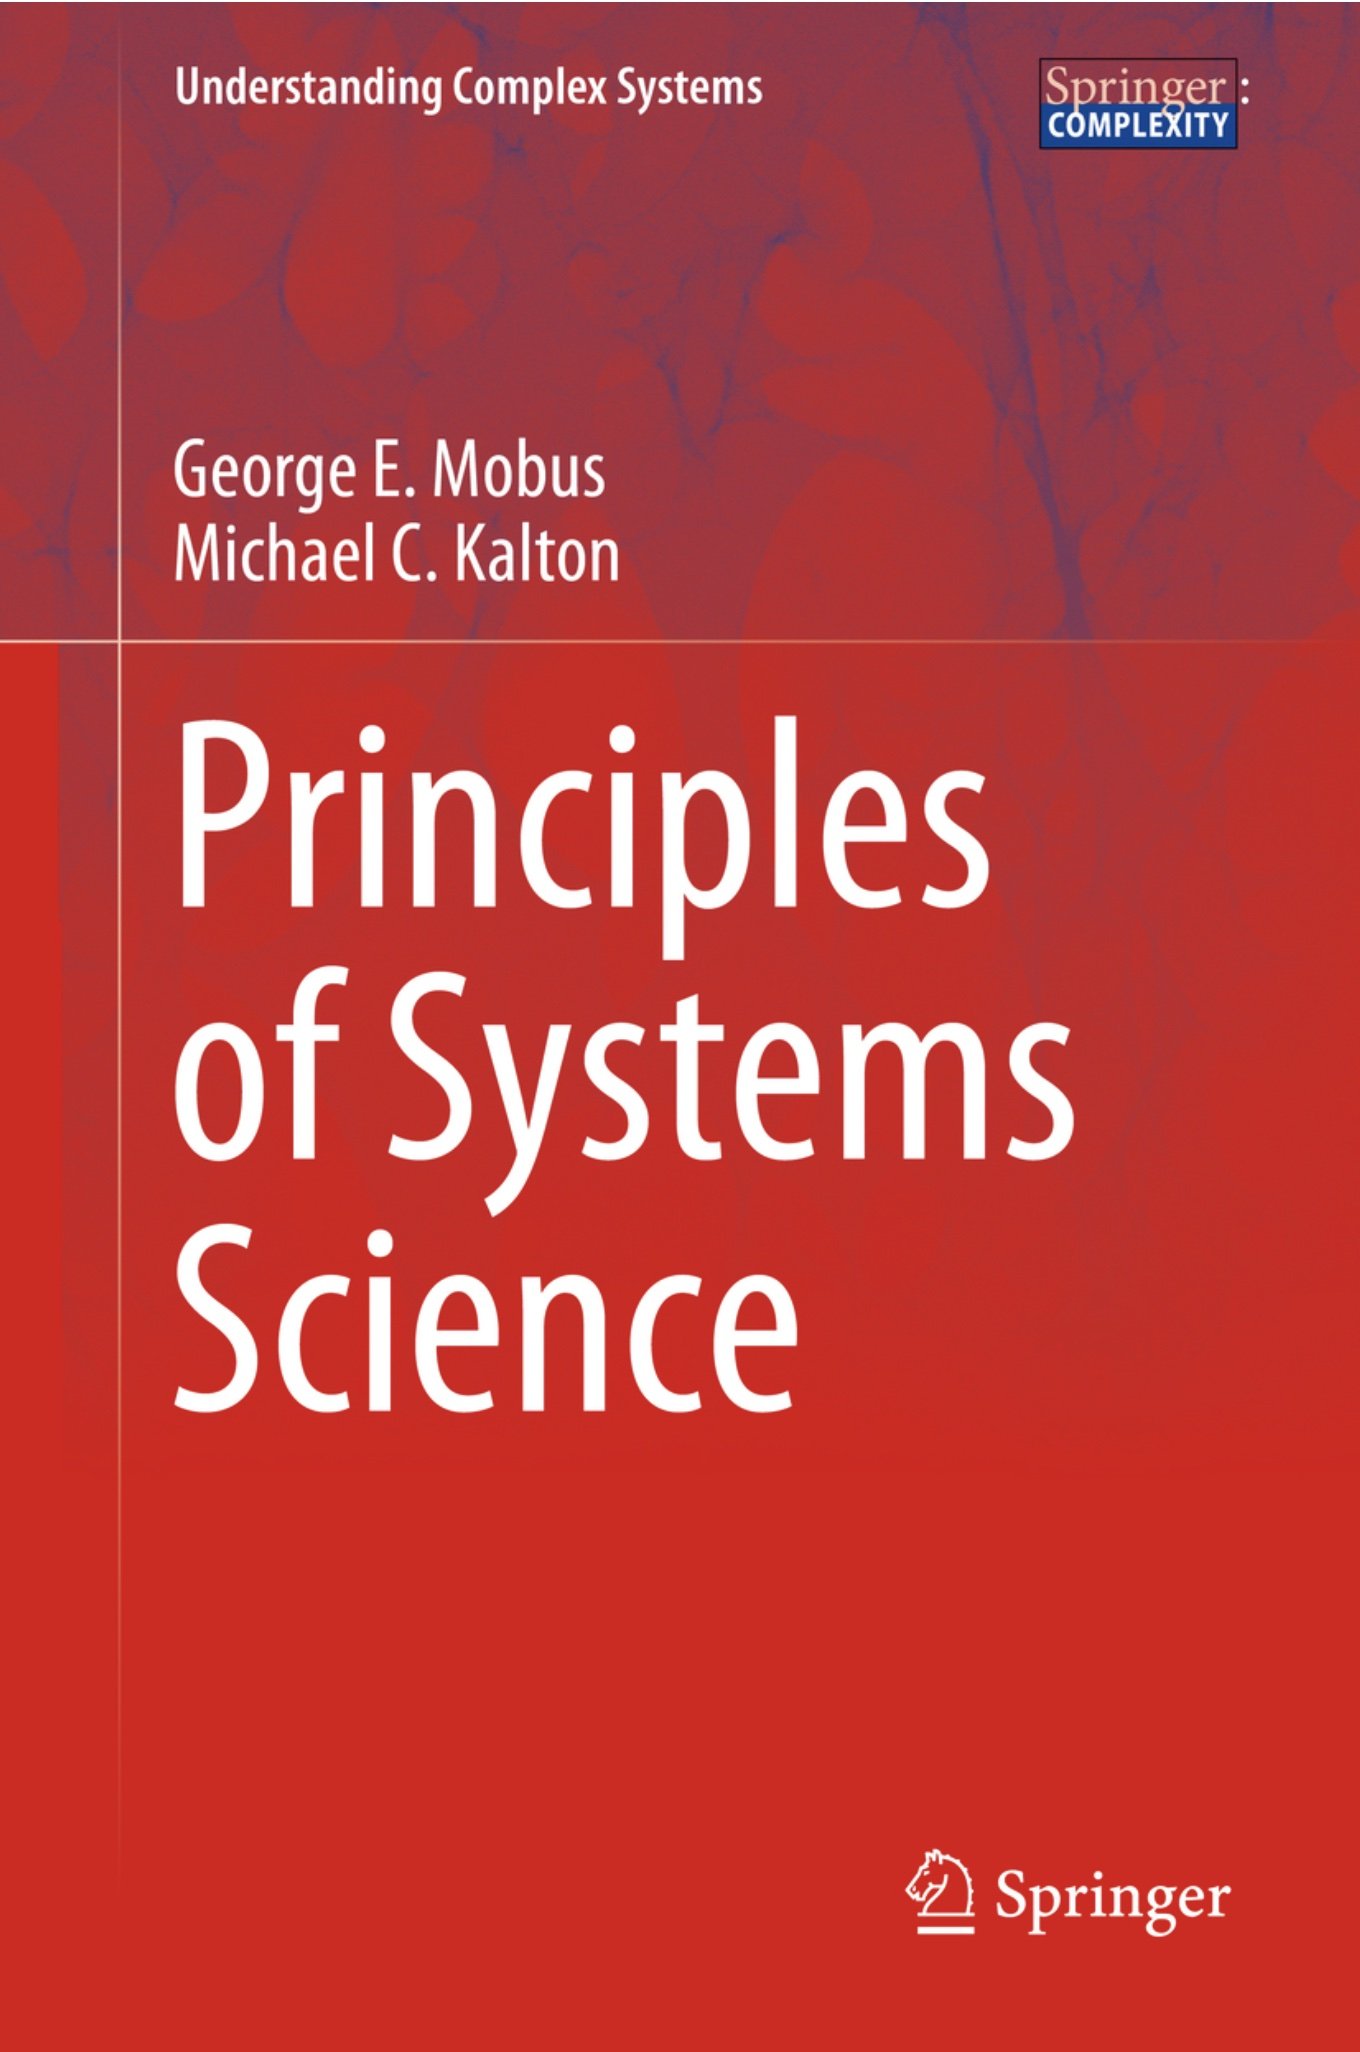 Principles of Systems Science.jpg